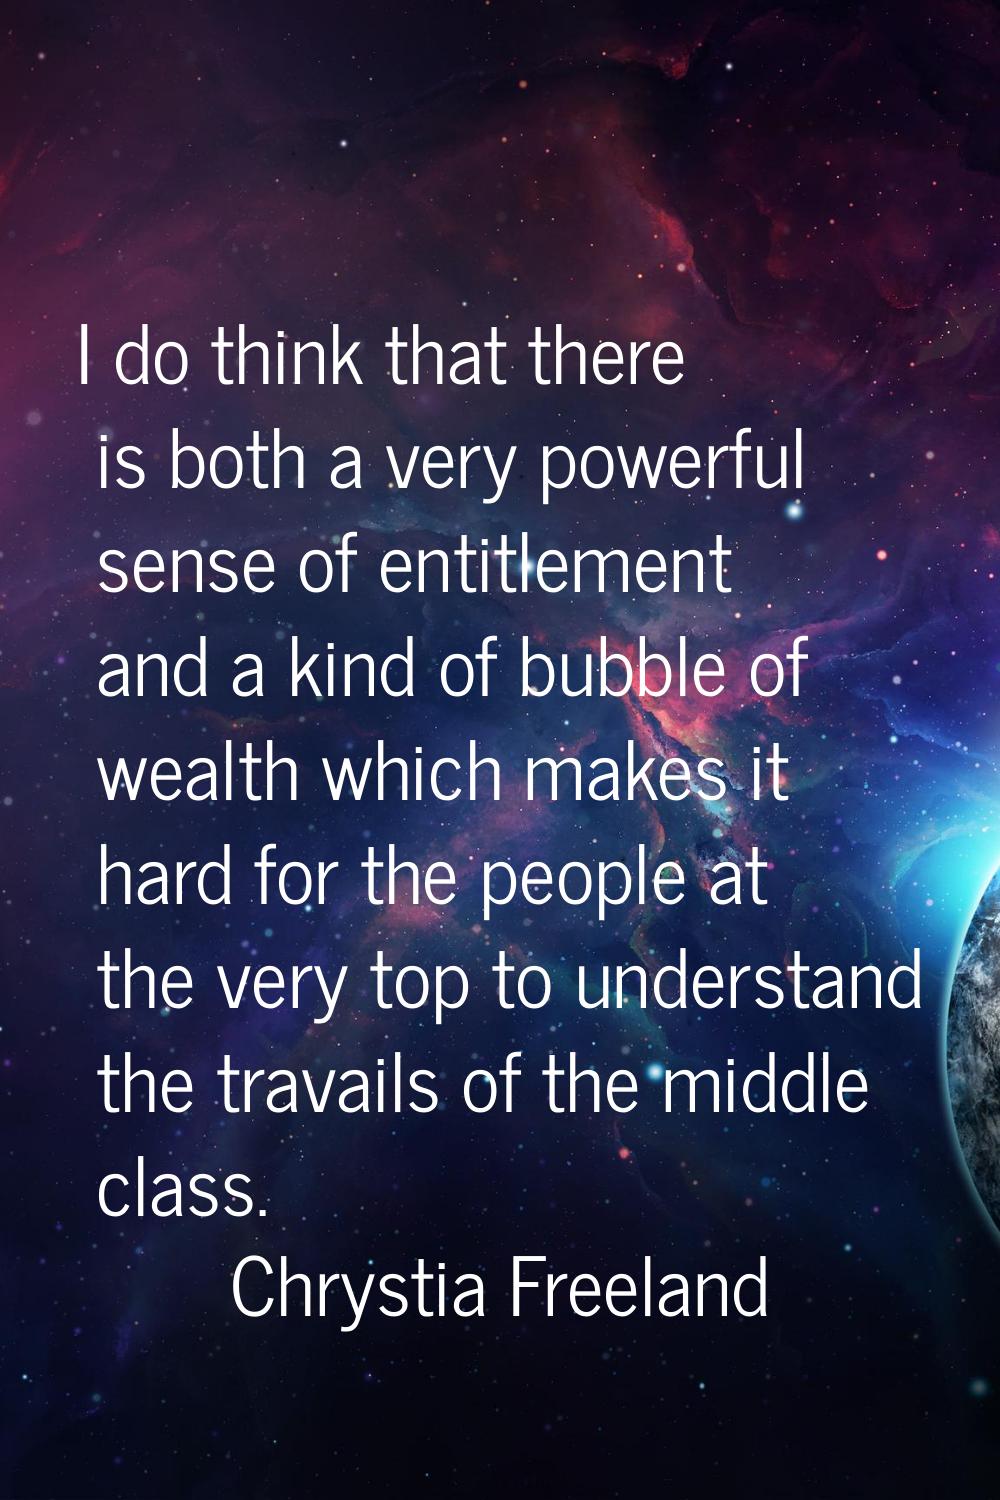 I do think that there is both a very powerful sense of entitlement and a kind of bubble of wealth w